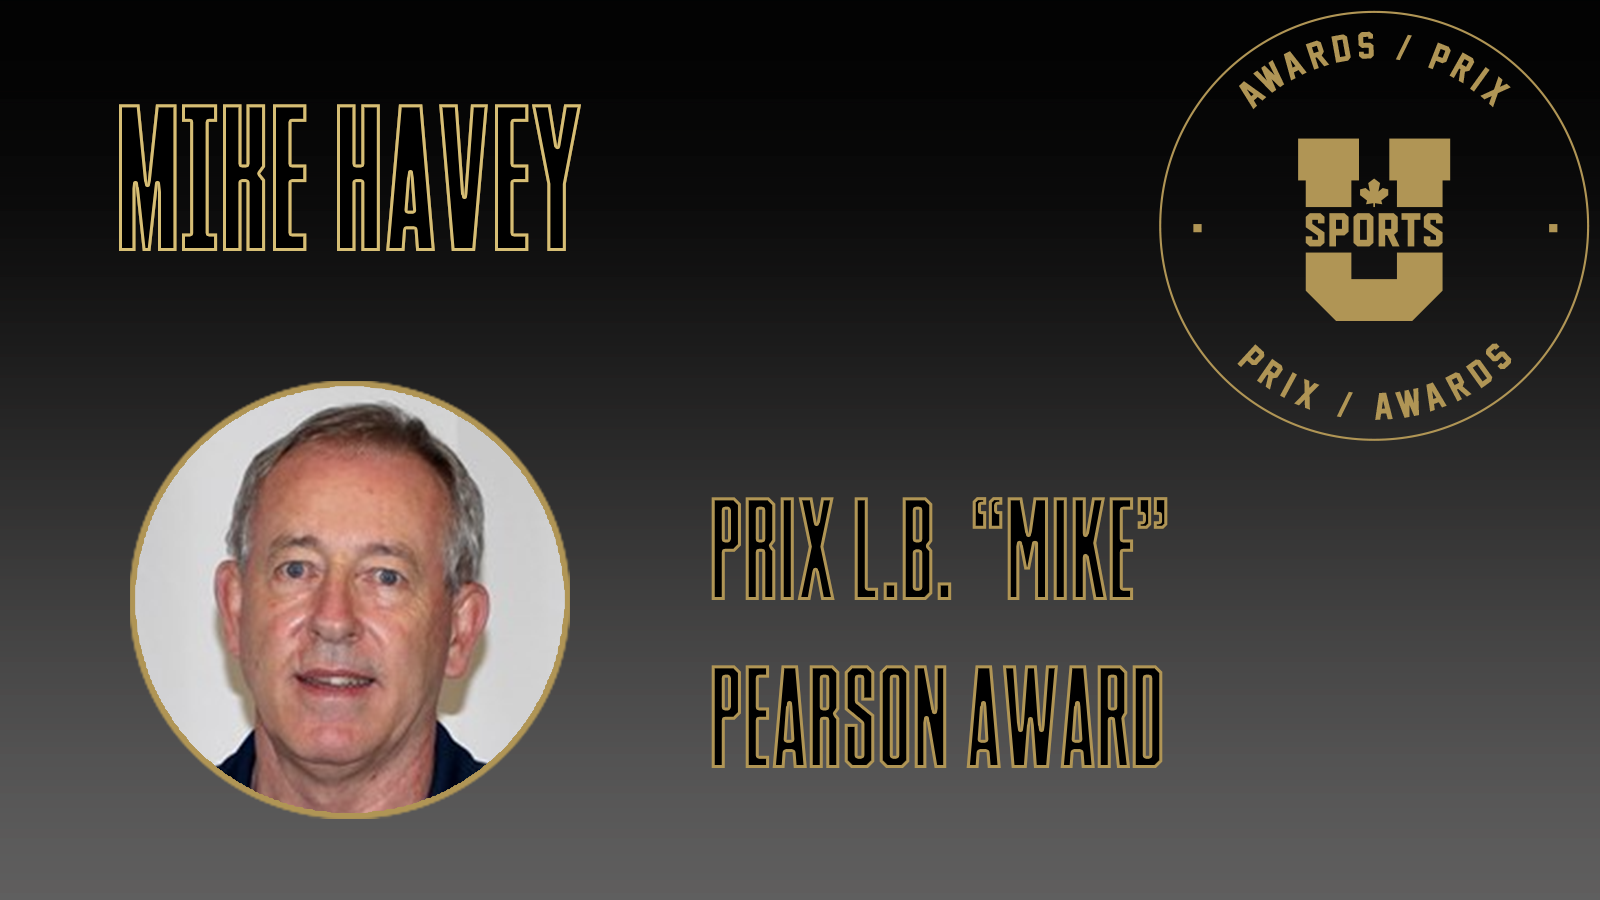 MIKE_HAVEY_AWARD.png (242 KB)